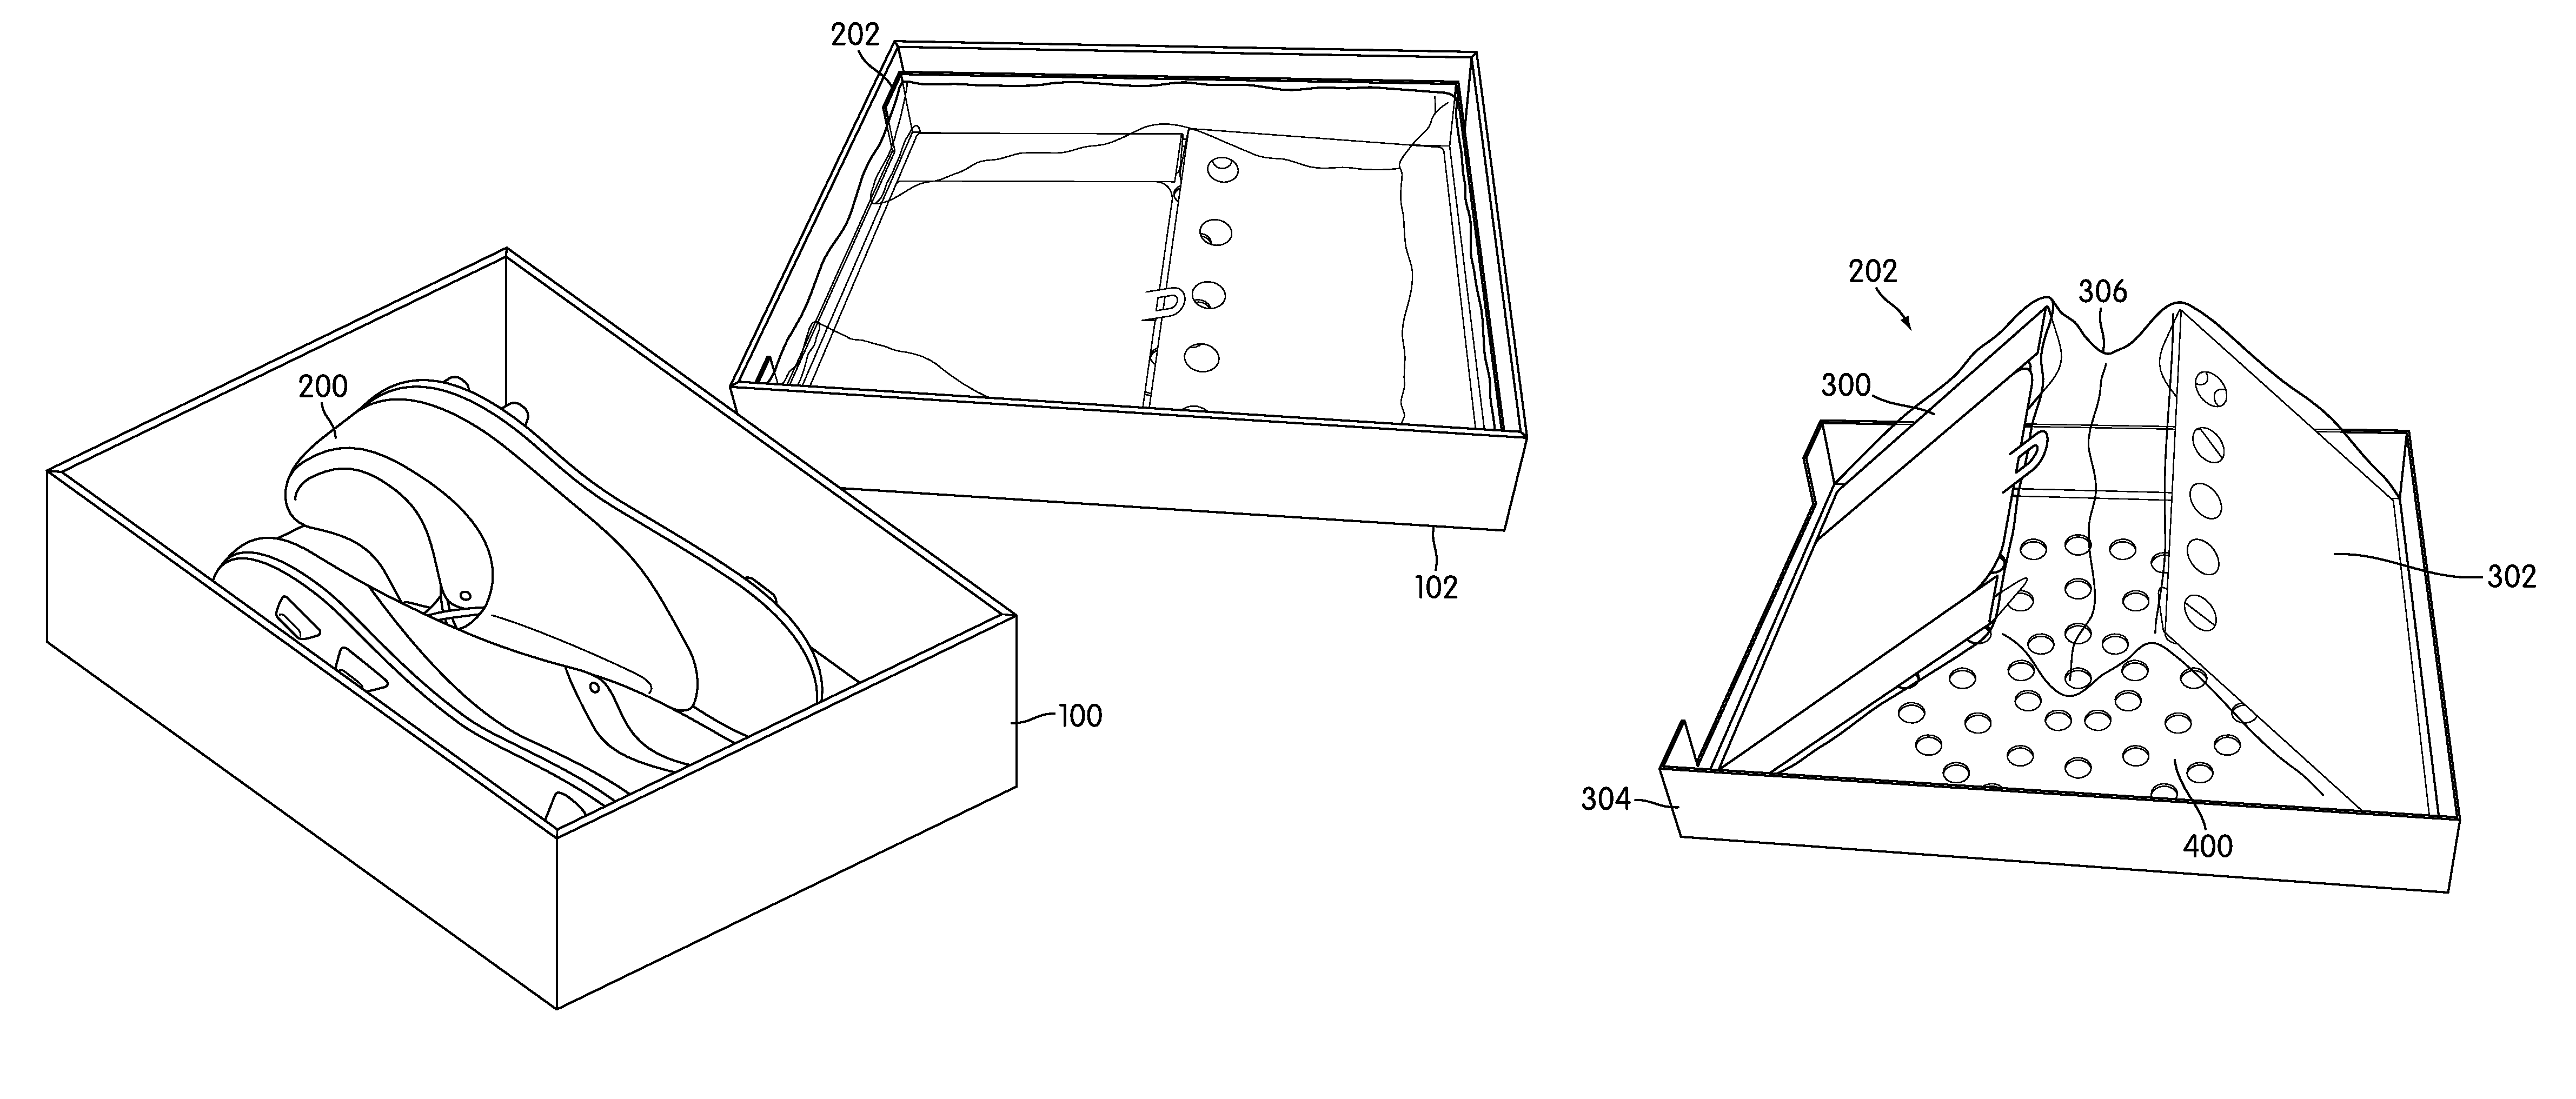 Method of custom fitting an article of footwear and apparatus including a container